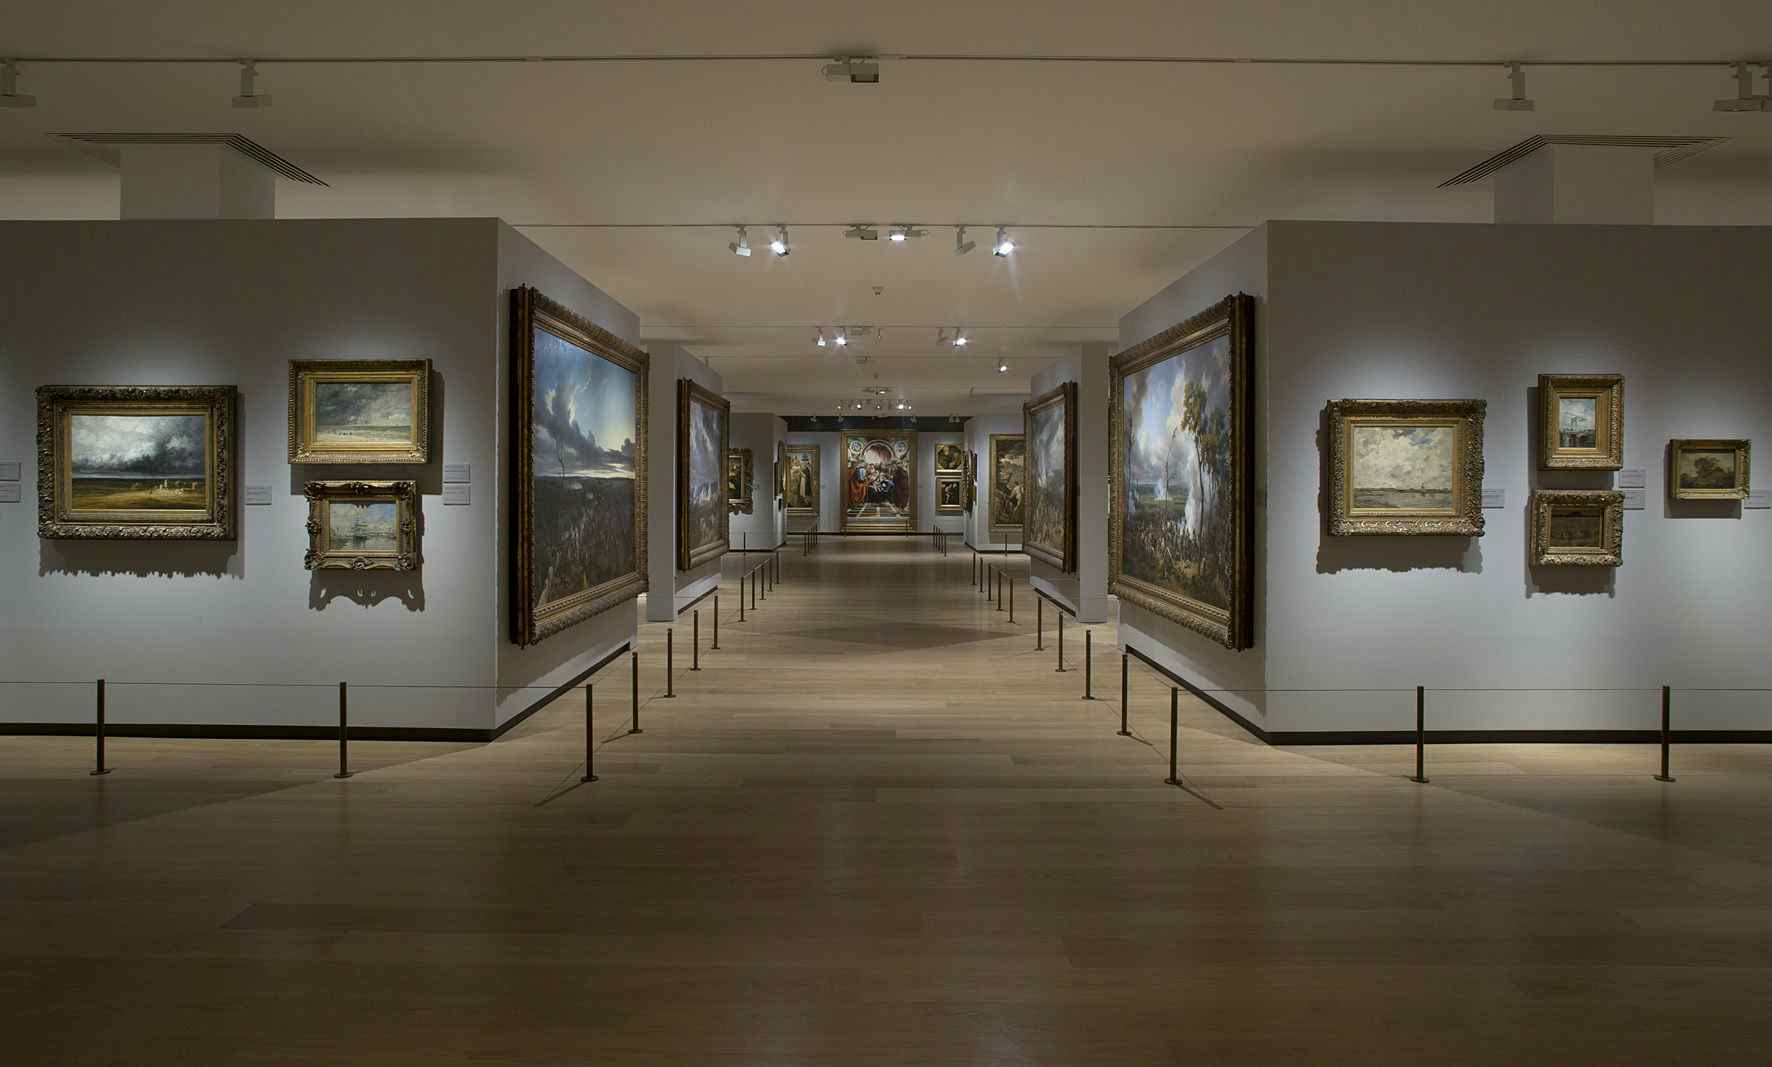 Book Gallery A at The National Gallery. A London Venue for Hire – HeadBox